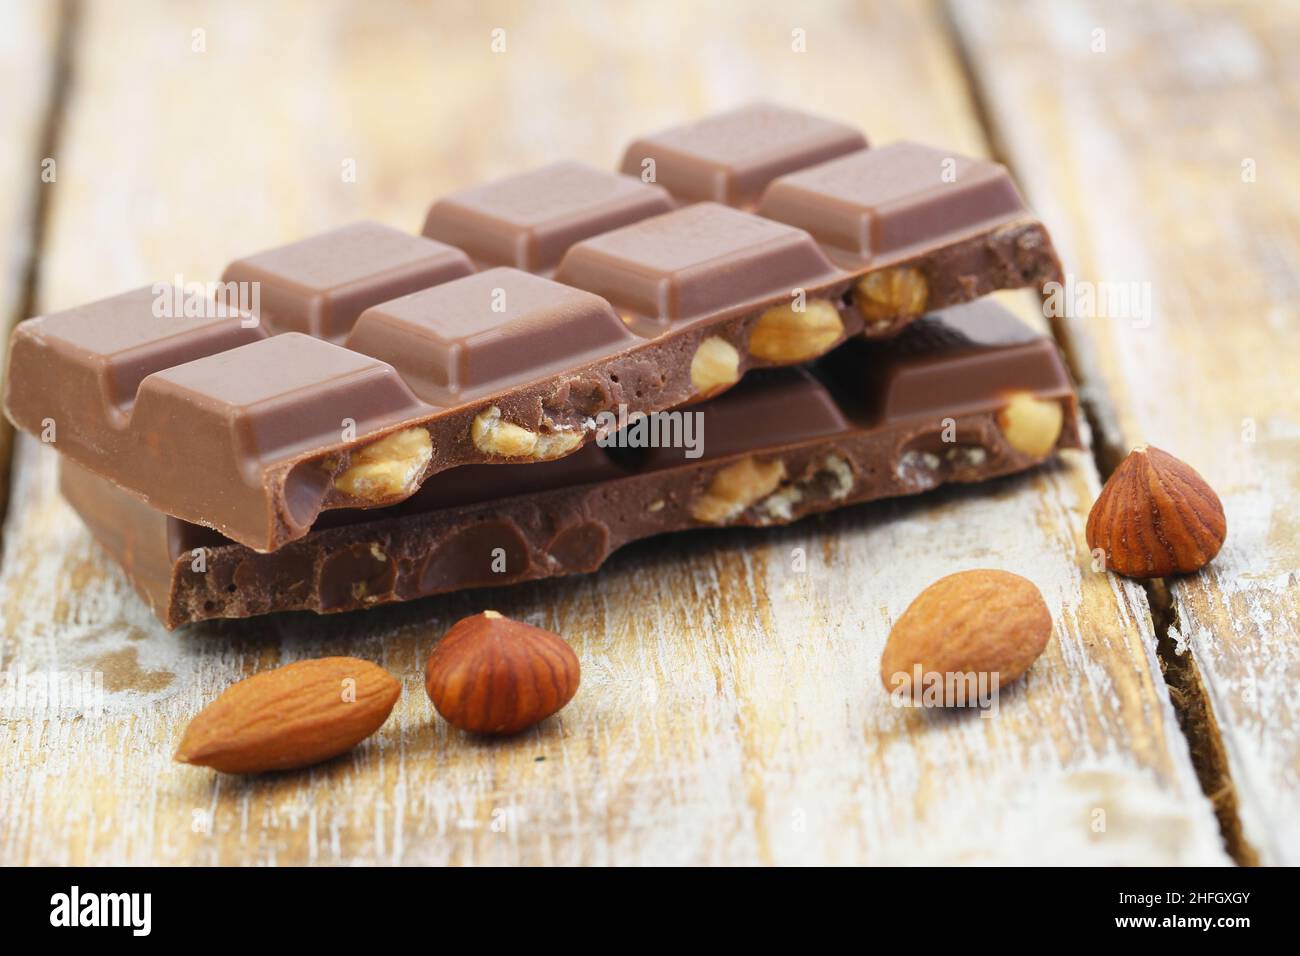 Two milk chocolate pieces with whole hazelnuts and almonds on rustic wooden surface Stock Photo